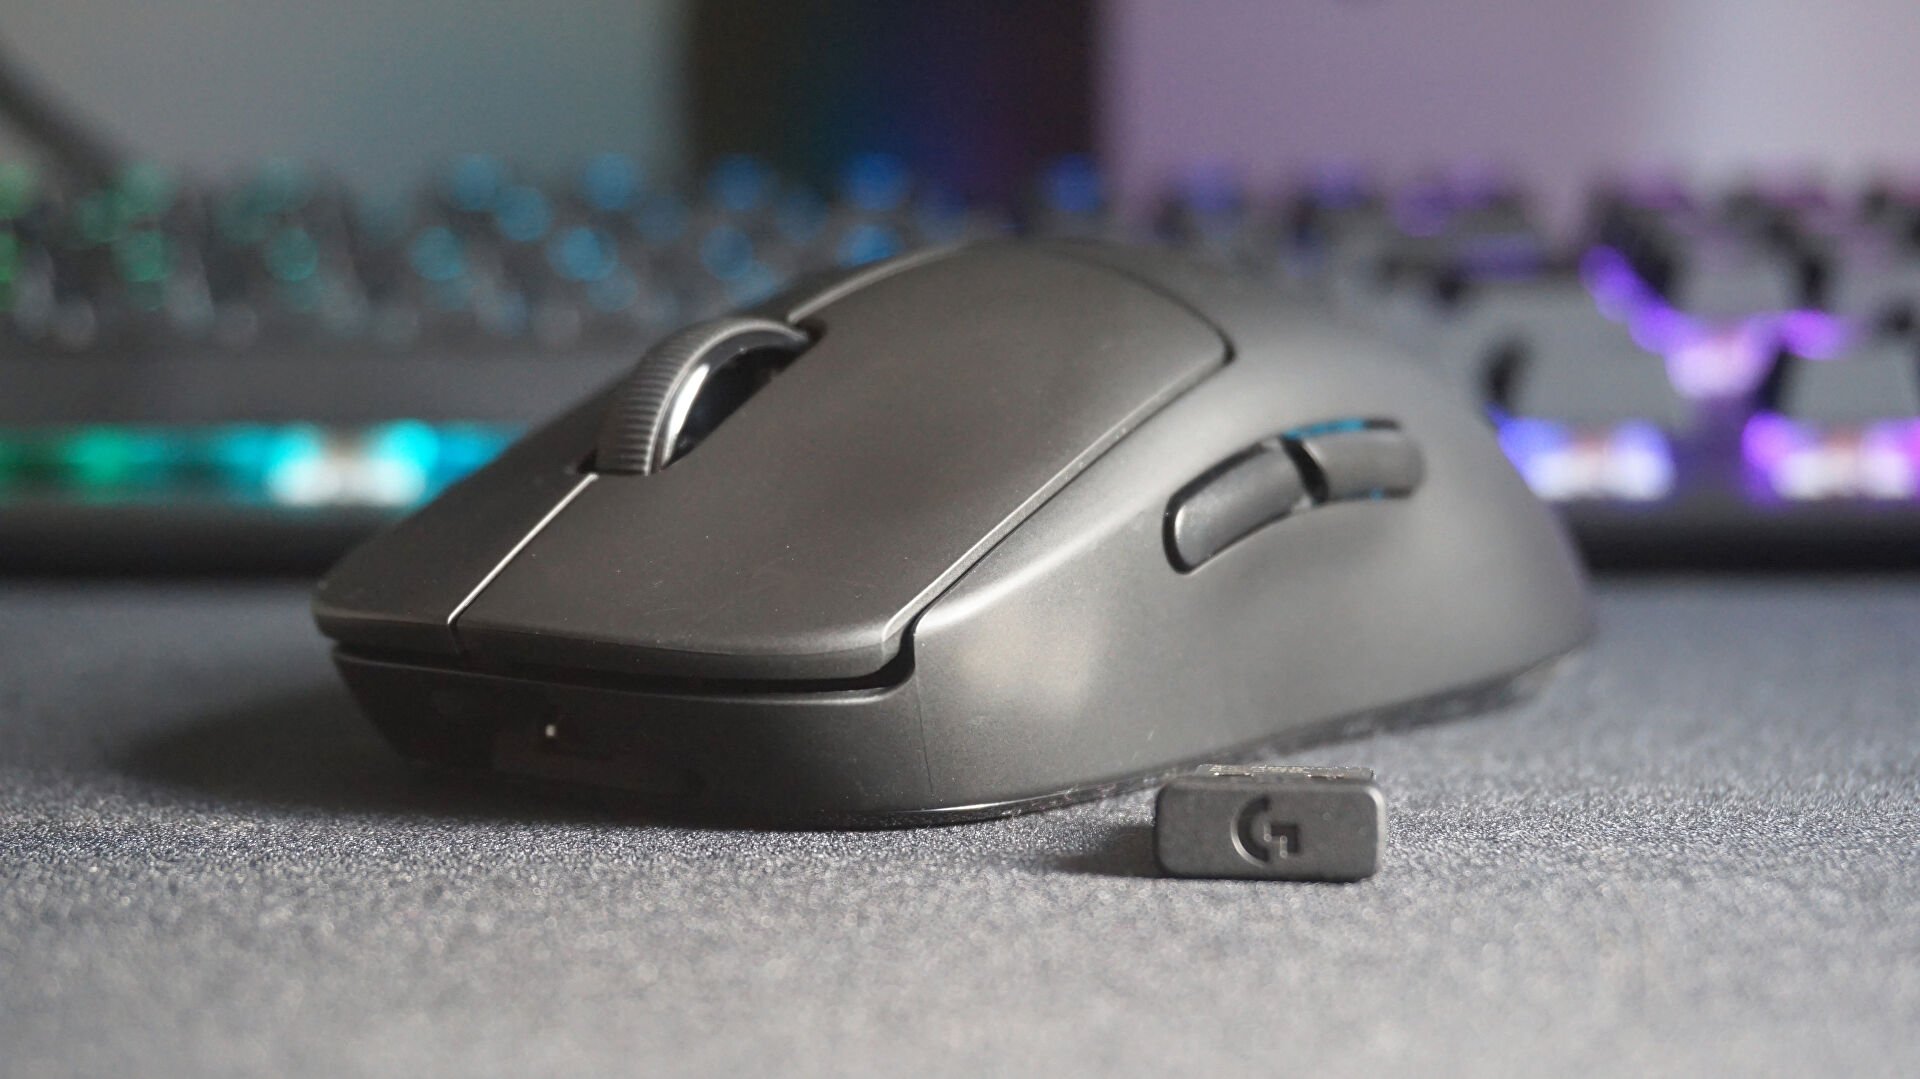 How to Sync Logitech Wireless Mouse with Different Receiver